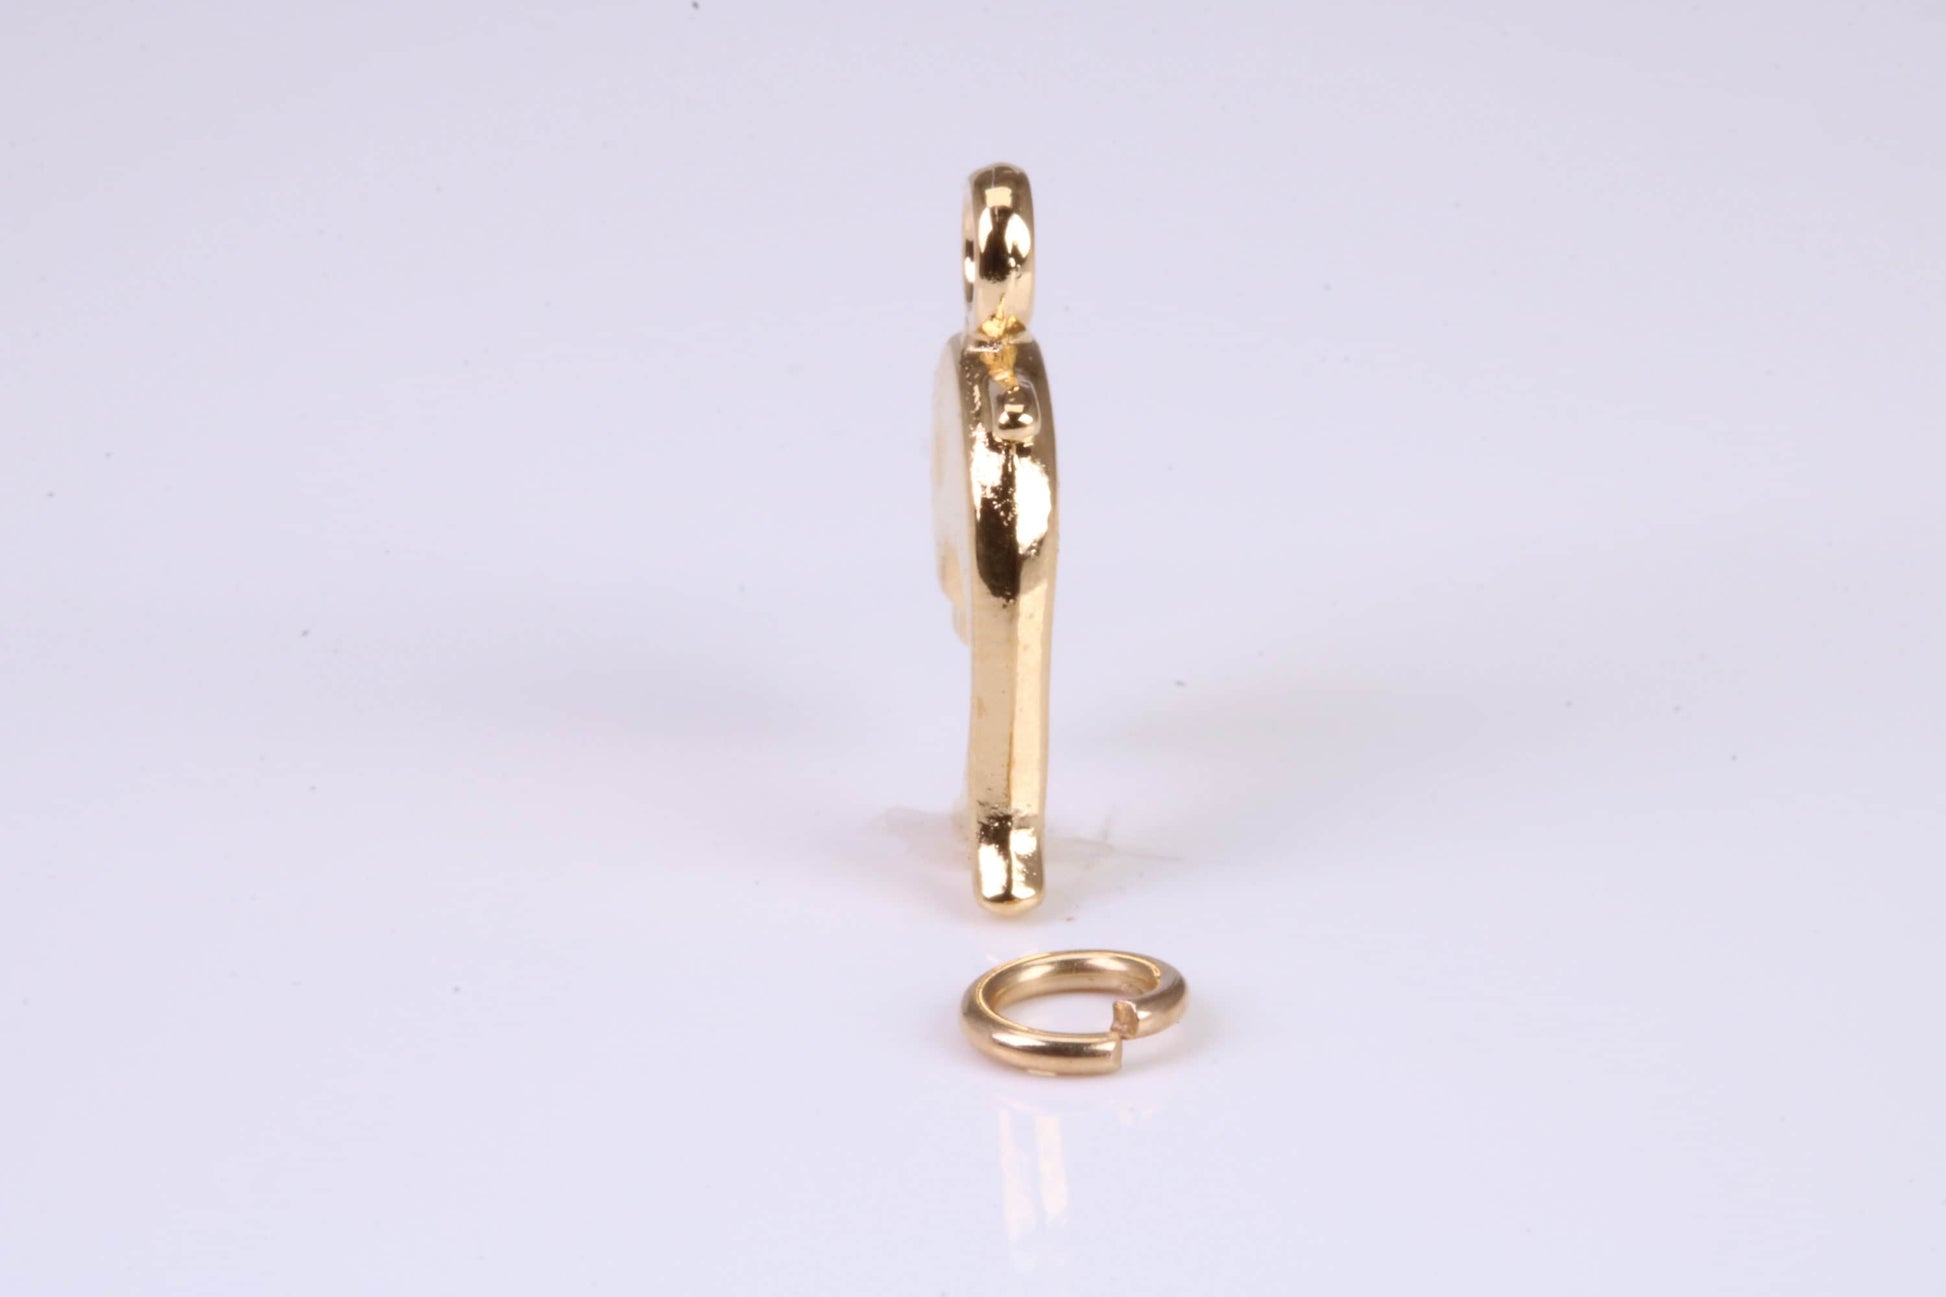 Dolphin Charm, Traditional Charm, Made from Solid Yellow Gold, British Hallmarked, Complete with Attachment Link